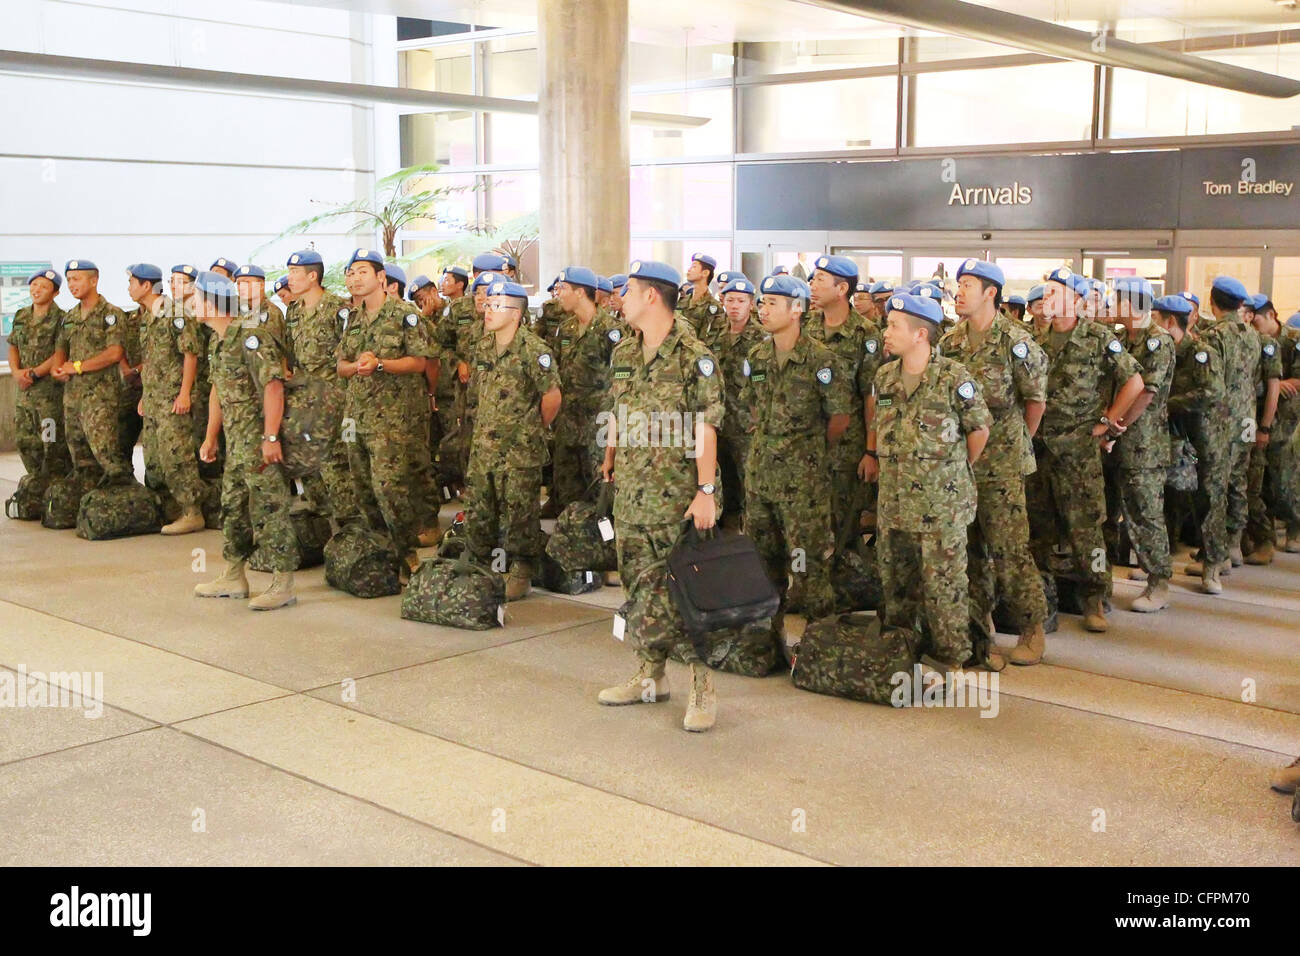 A UN peacekeeping force from Japan arriving at LAX after a 6 month deployment in Haiti Los Angeles, USA - 09.02.11 Stock Photo